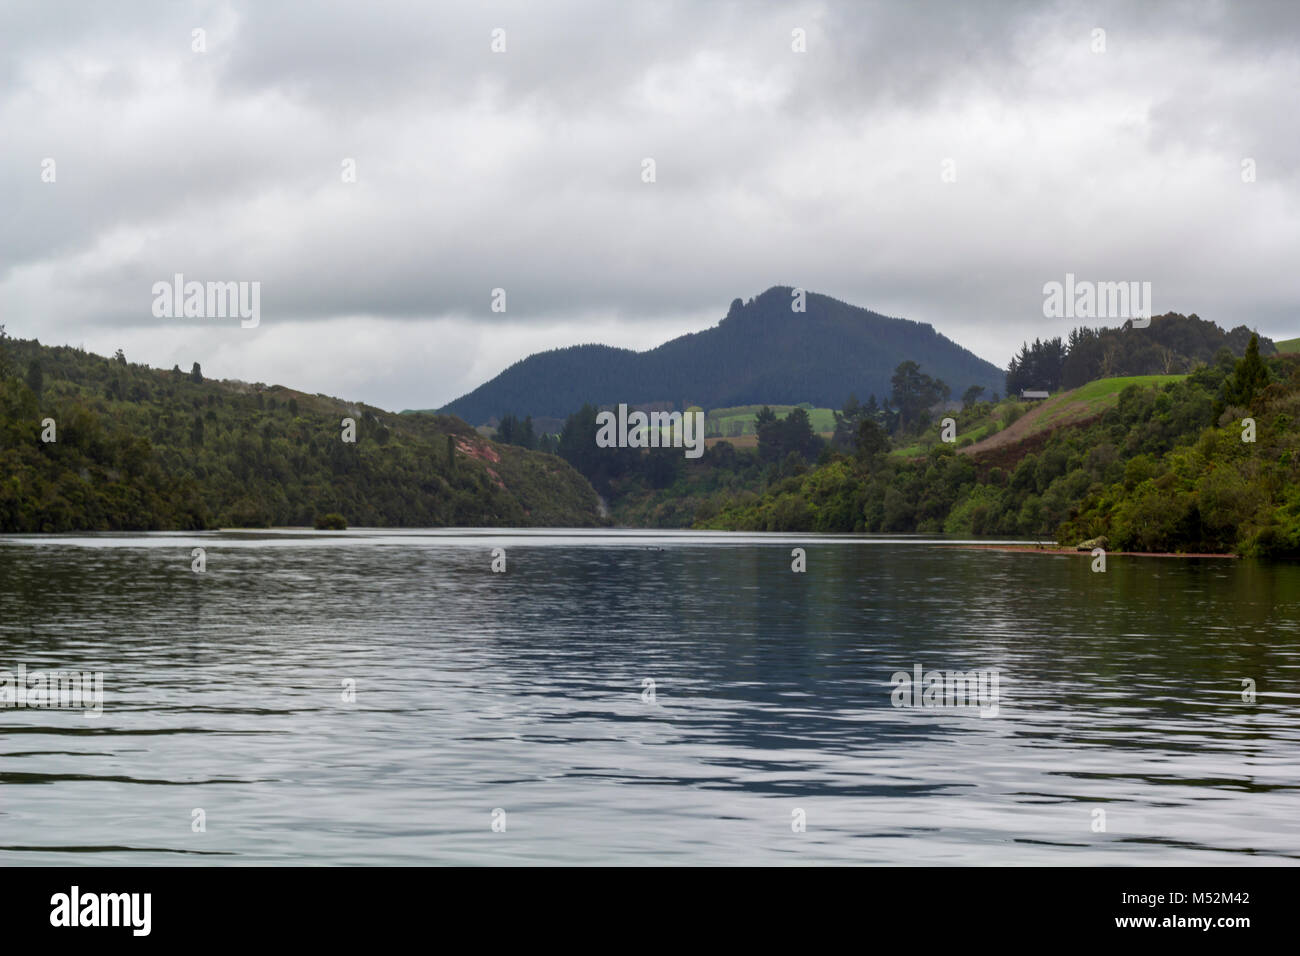 Stunning New Zealand landscape, river and meadows in the bakground Stock Photo